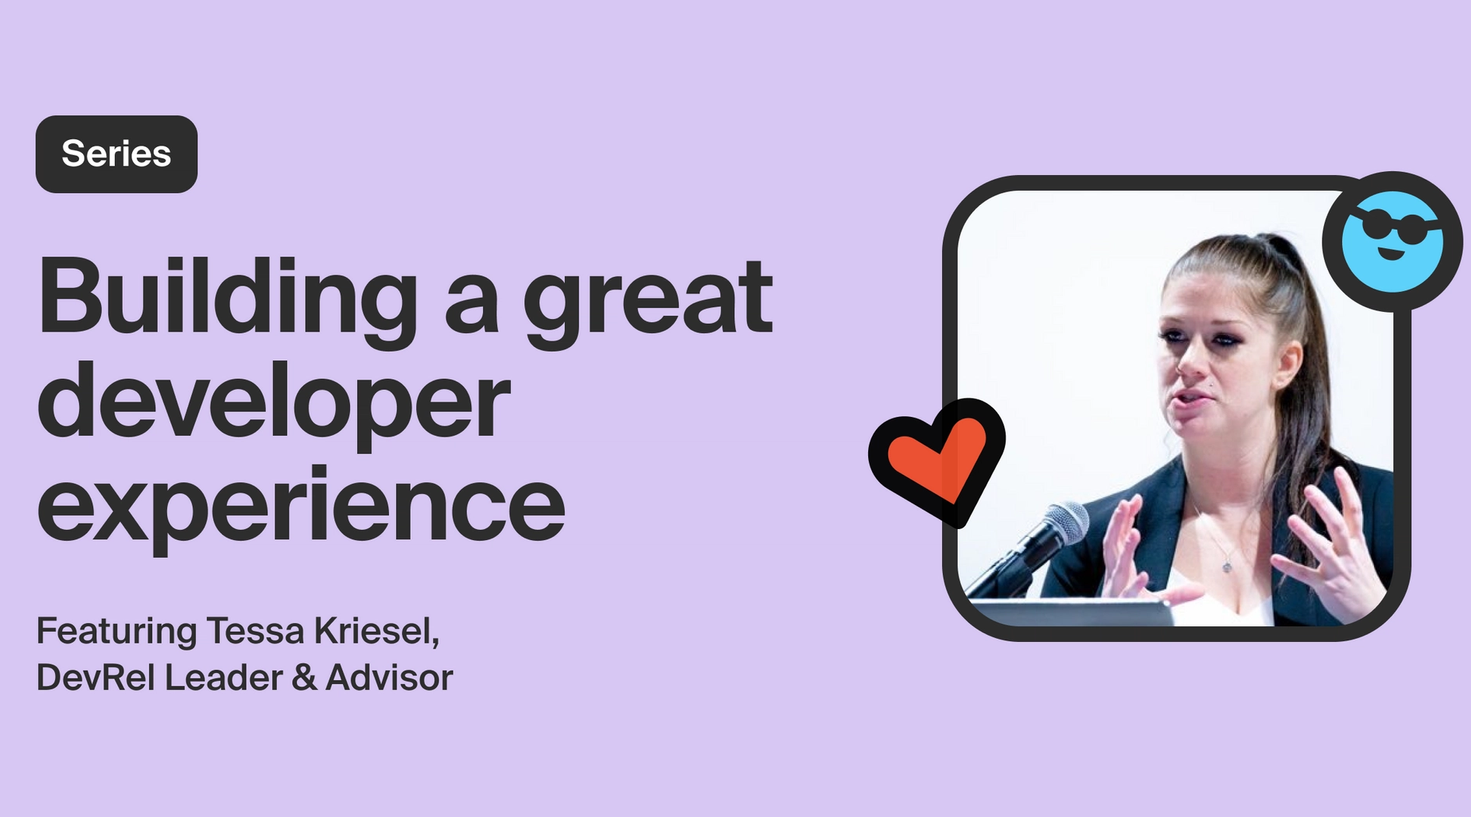 Essential elements of a great developer experience